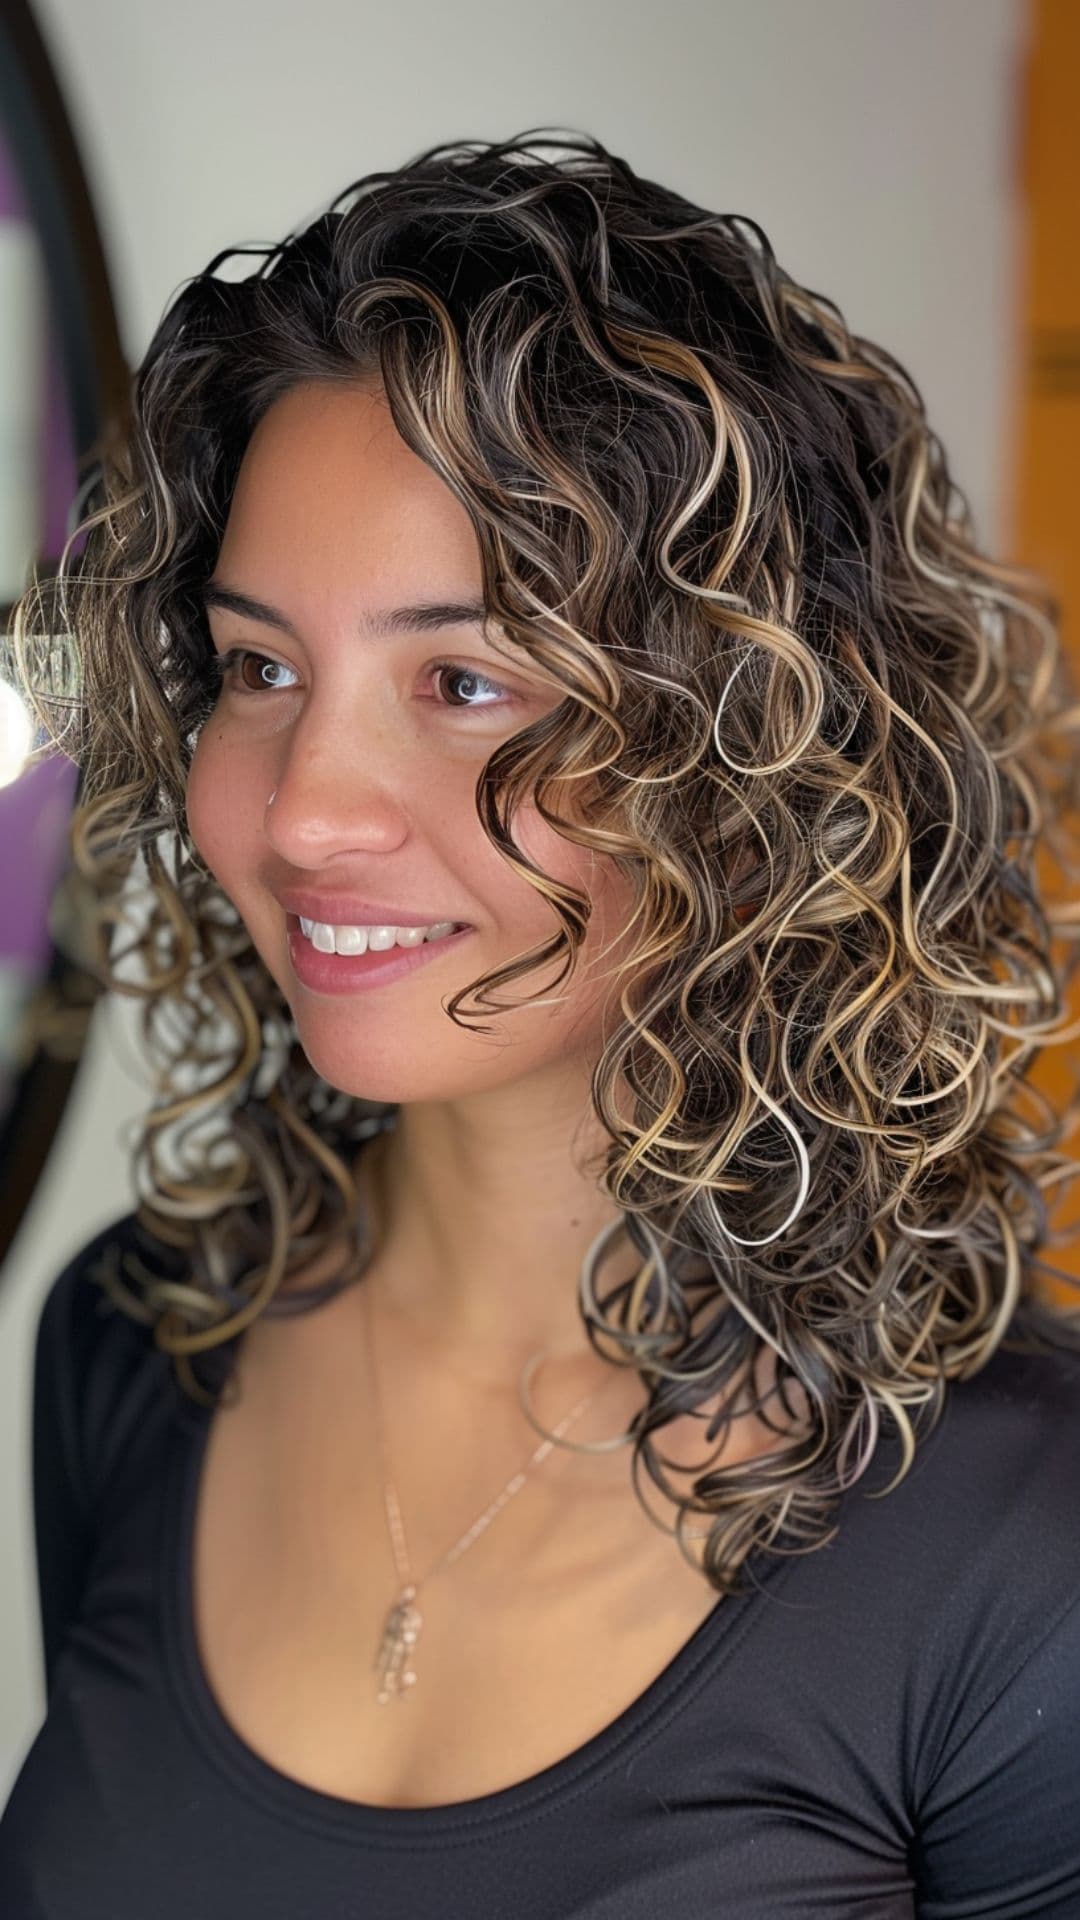 A woman modelling a honey blonde highlights on curly hair.